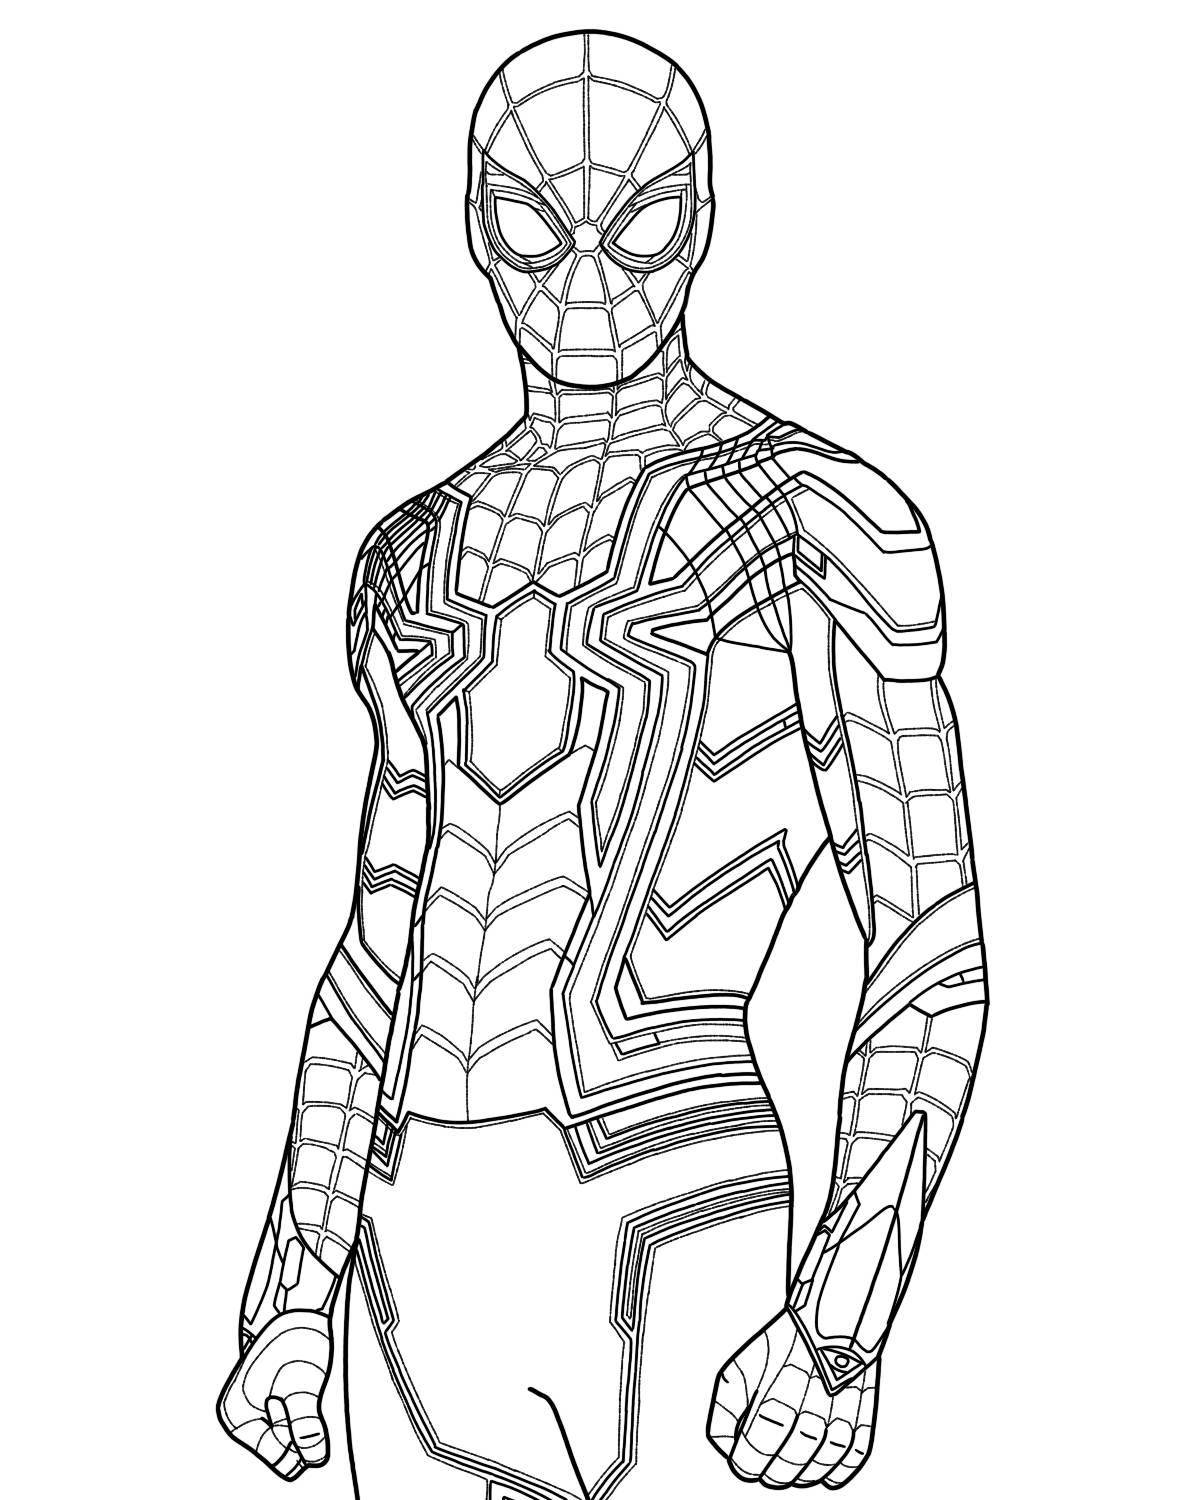 Shiny iron spider coloring page